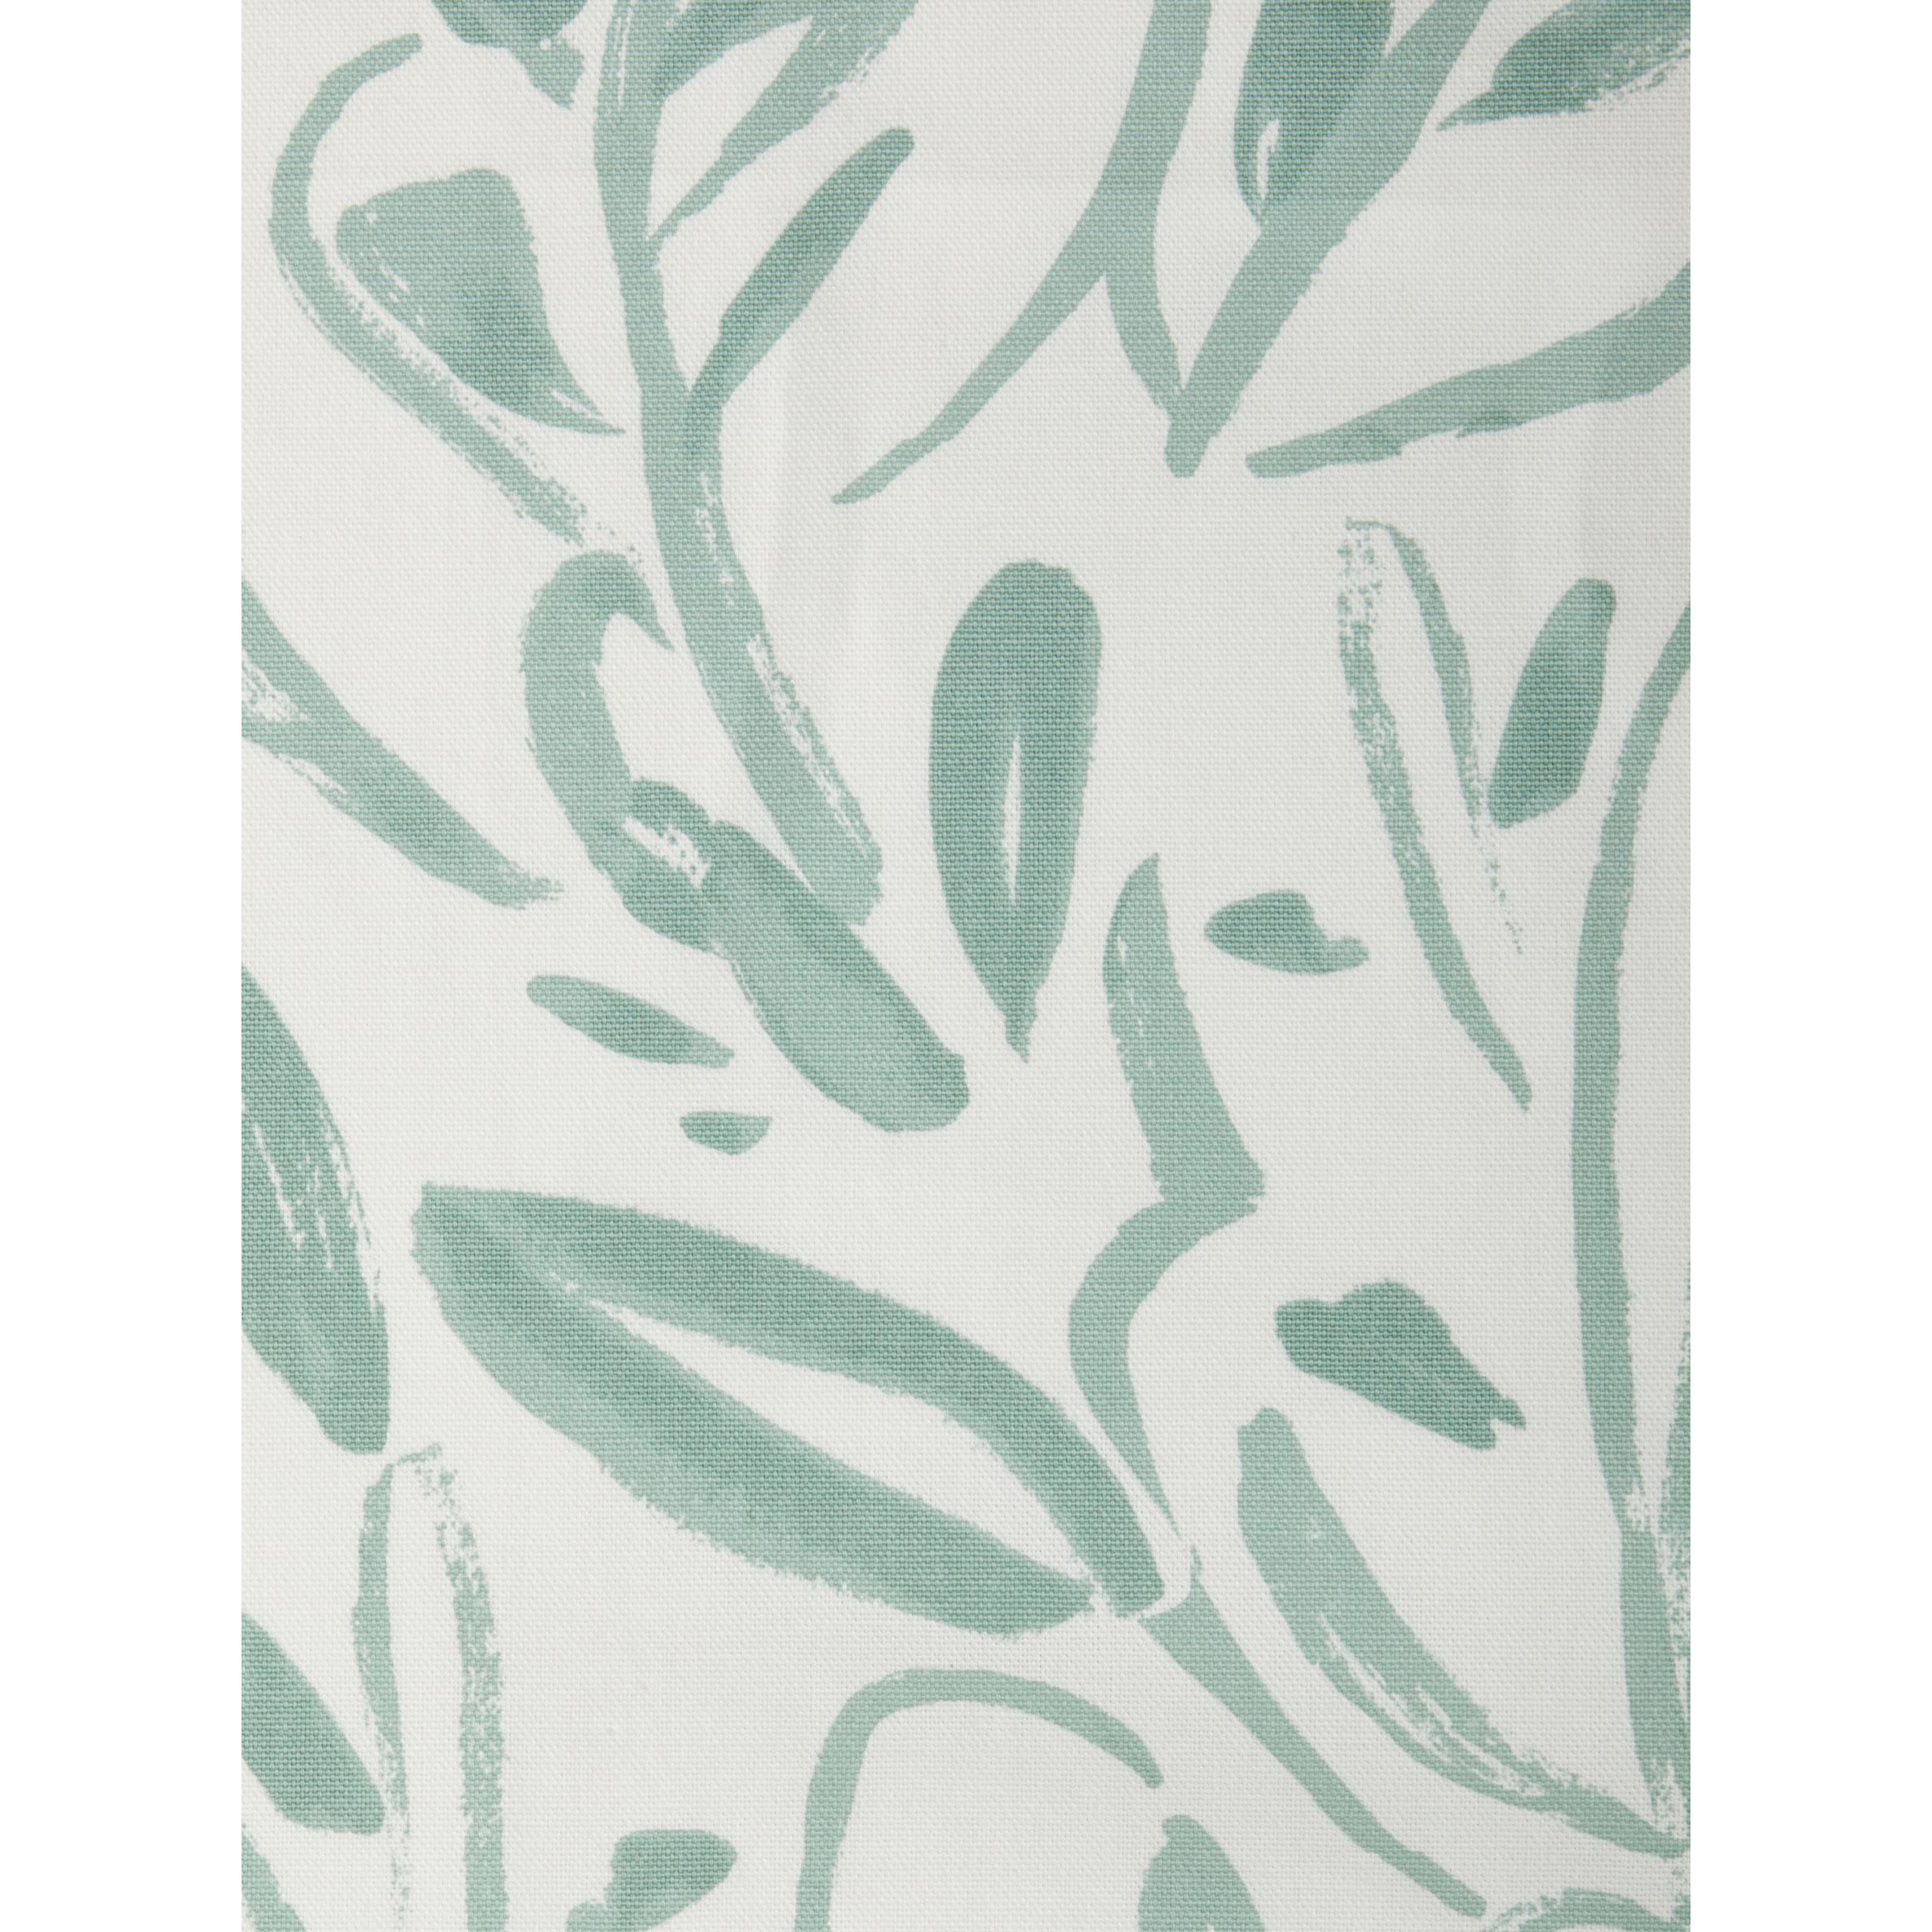 John Lewis Painted Leaves Made to Measure Curtains or Roman Blind, Dusty Green - image 1